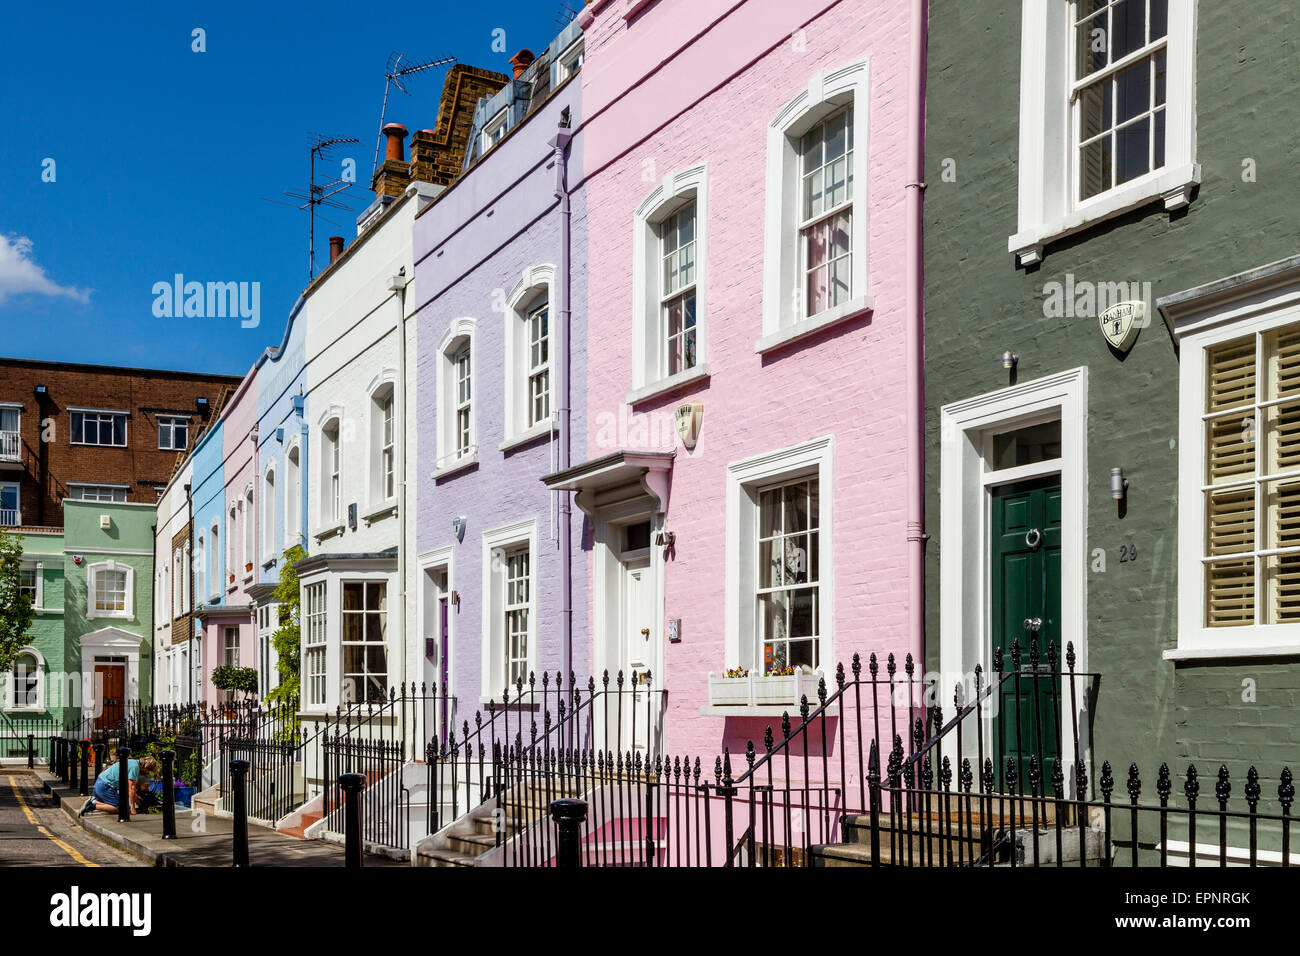 Case colorate off King's Road, a Chelsea, Londra, Inghilterra Foto Stock